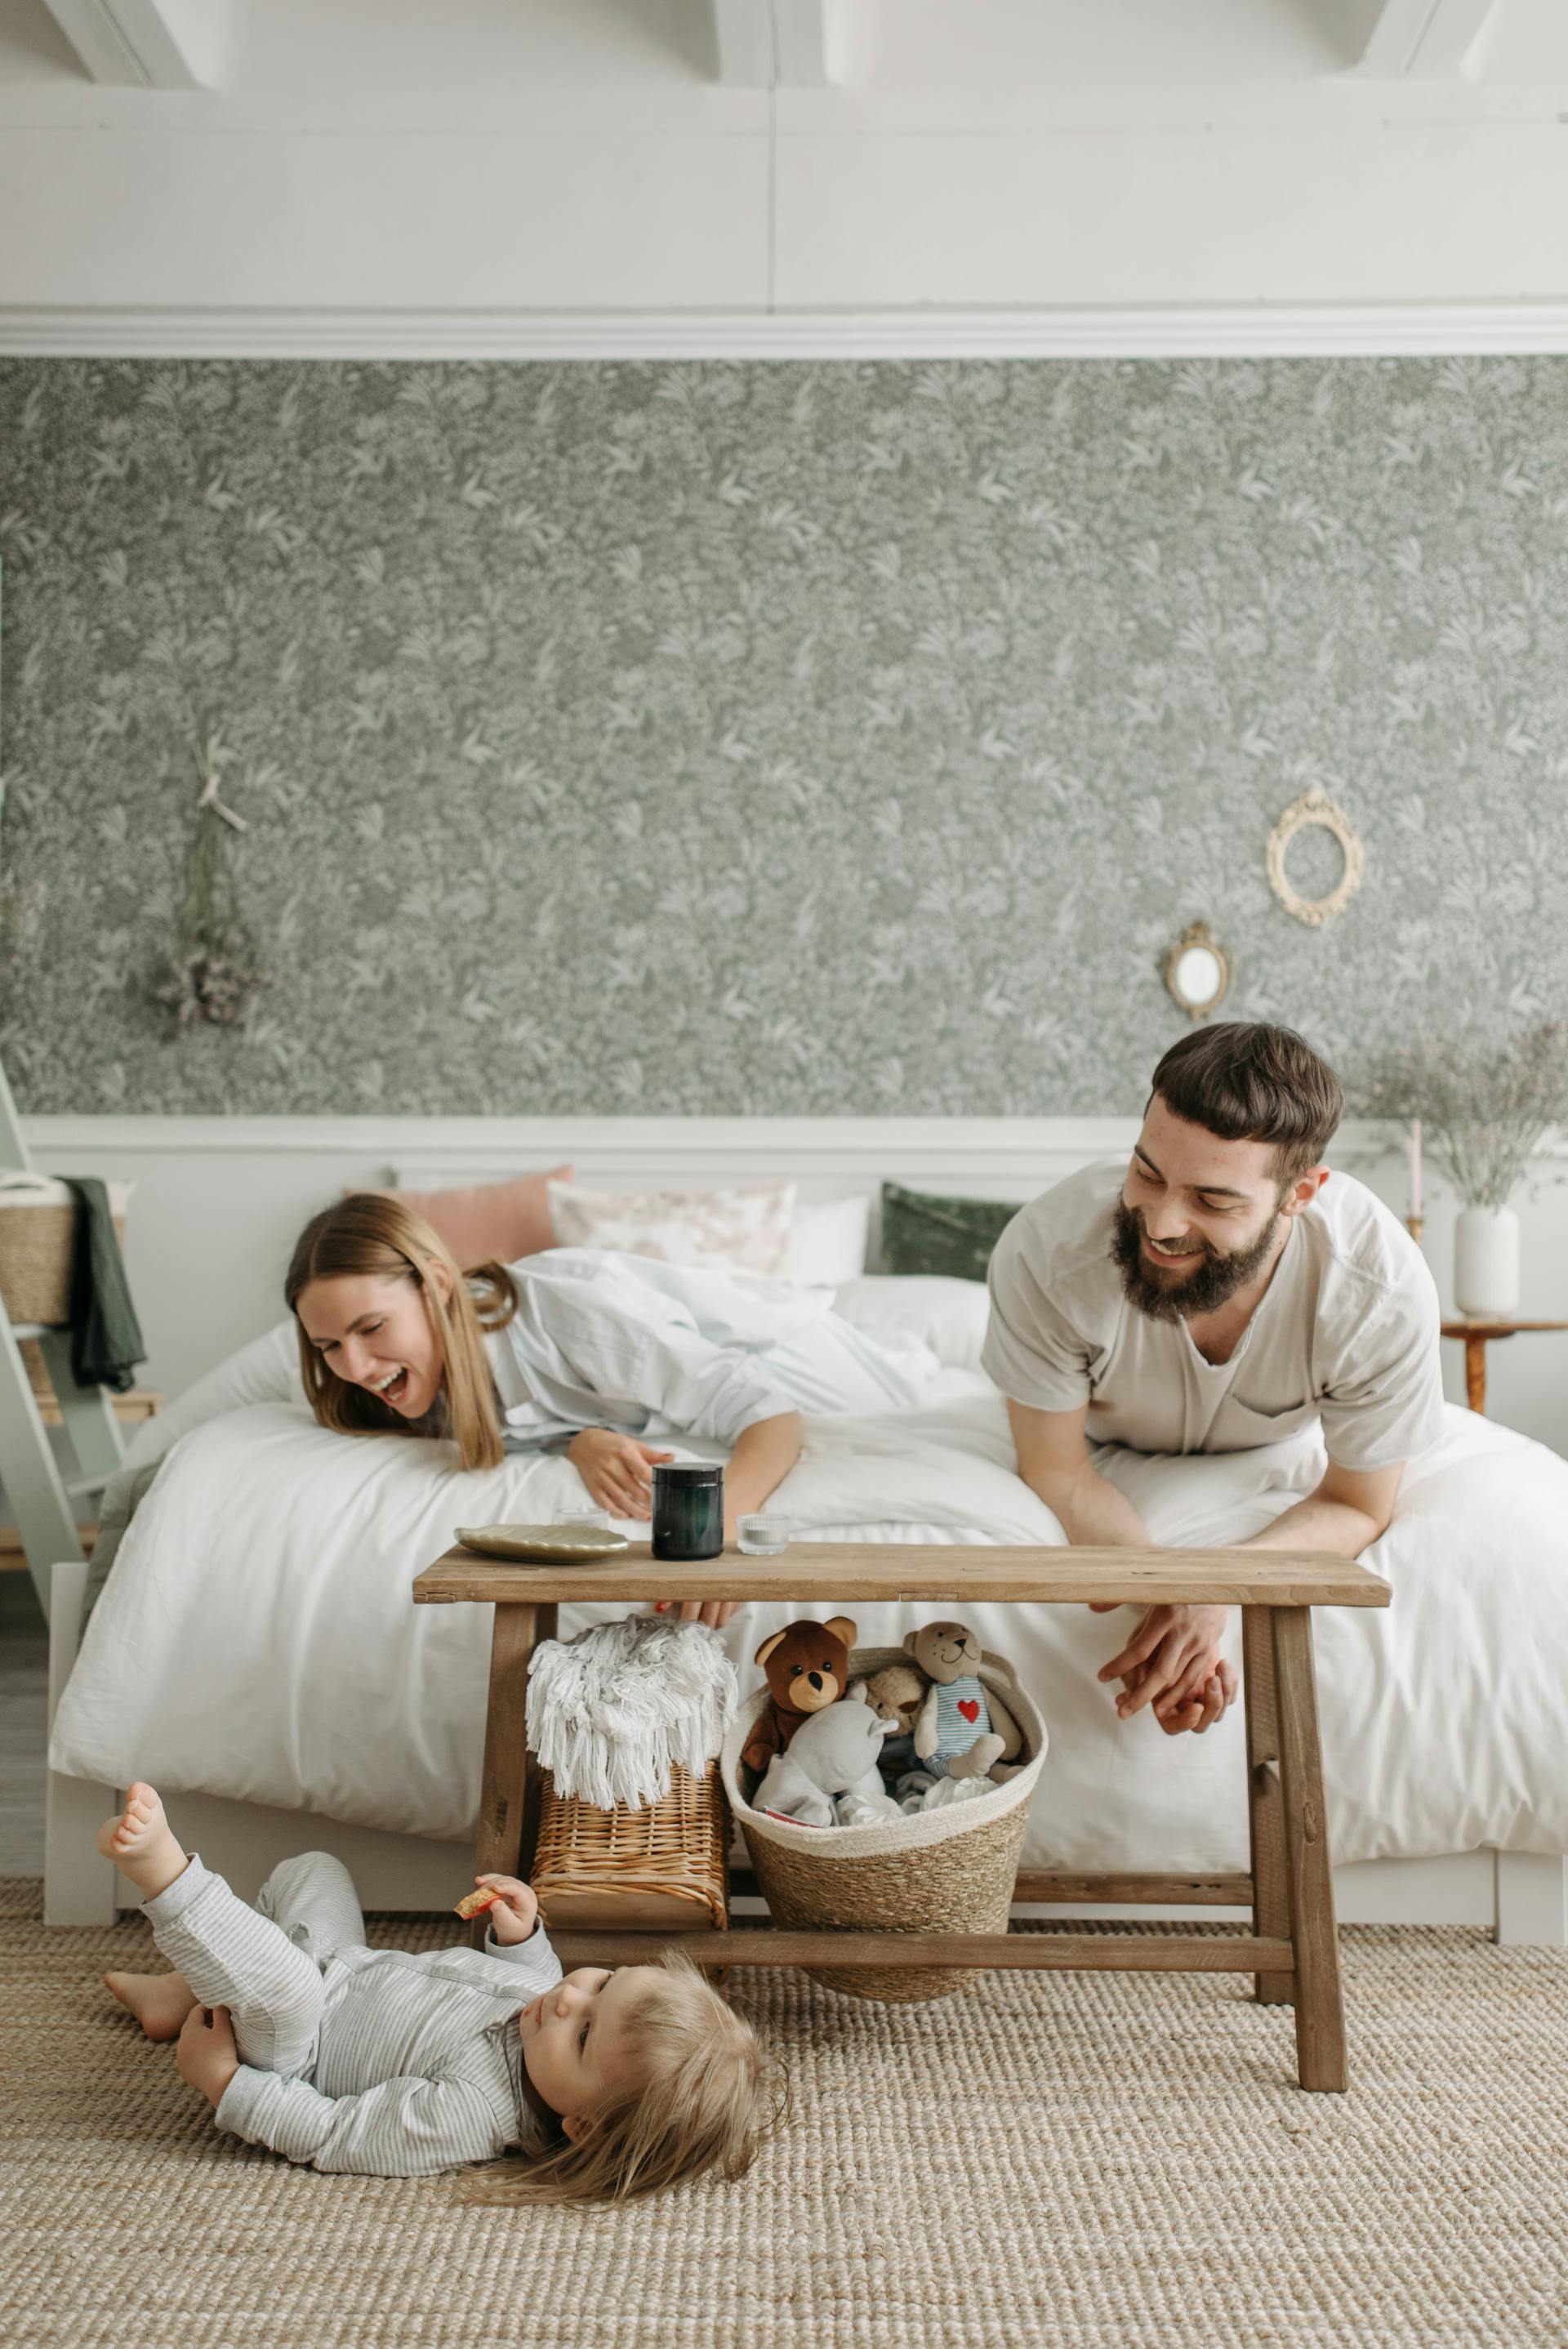 Happy couple playing with their little daughter in the bedroom | Source: Pexels